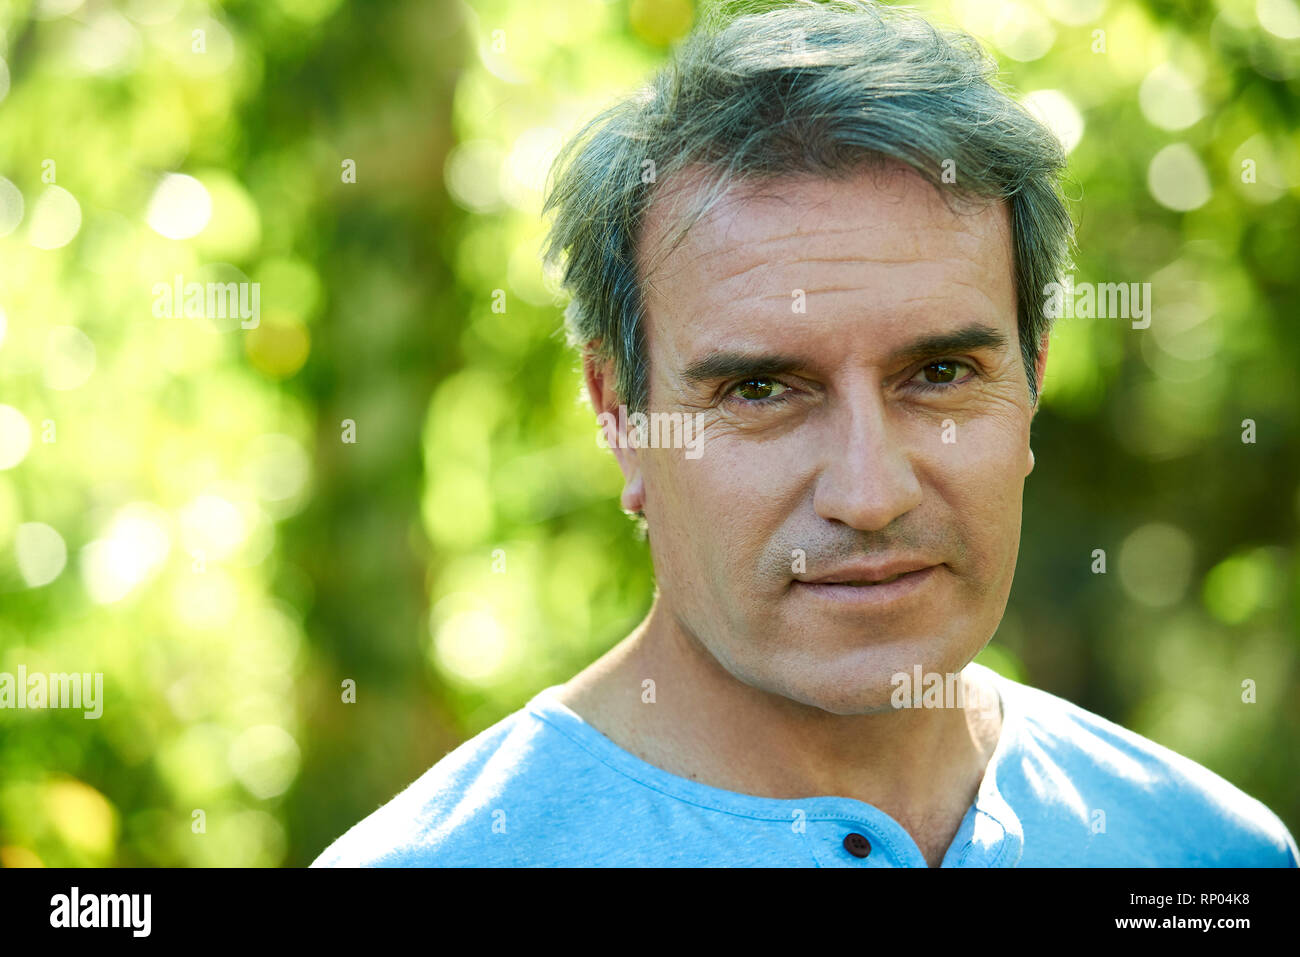 Close-up of a mature man standing outdoors Stock Photo